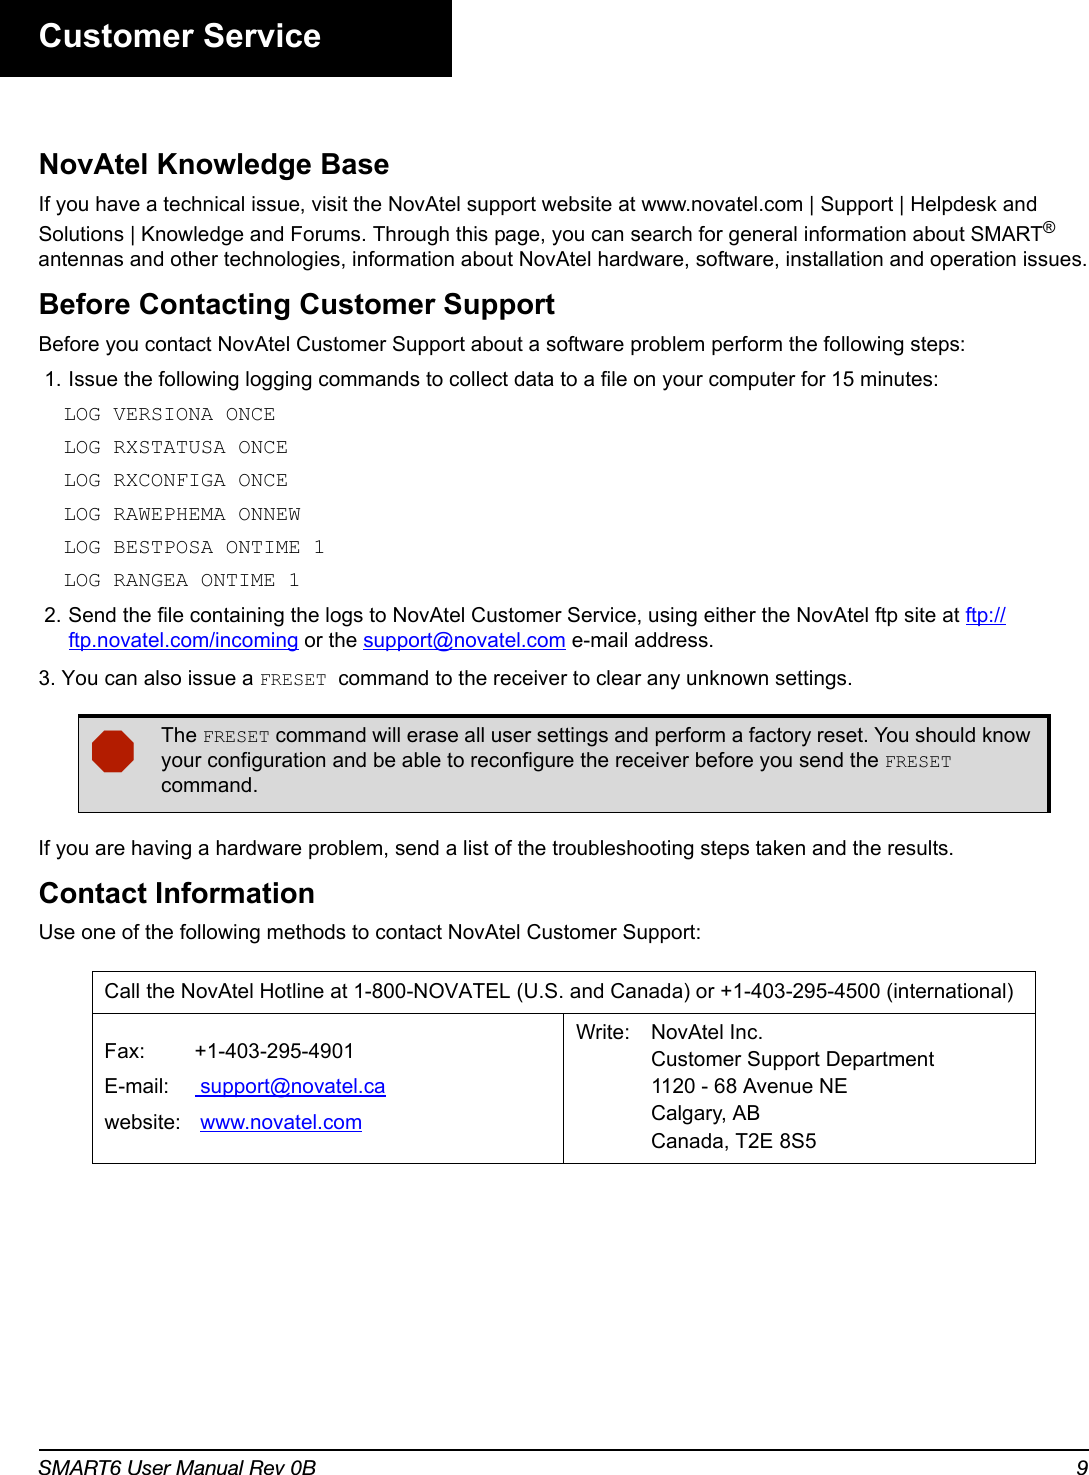 SMART6 User Manual Rev 0B 9Customer ServiceNovAtel Knowledge BaseIf you have a technical issue, visit the NovAtel support website at www.novatel.com | Support | Helpdesk and Solutions | Knowledge and Forums. Through this page, you can search for general information about SMART® antennas and other technologies, information about NovAtel hardware, software, installation and operation issues.Before Contacting Customer SupportBefore you contact NovAtel Customer Support about a software problem perform the following steps: 1. Issue the following logging commands to collect data to a file on your computer for 15 minutes:LOG VERSIONA ONCELOG RXSTATUSA ONCELOG RXCONFIGA ONCELOG RAWEPHEMA ONNEWLOG BESTPOSA ONTIME 1LOG RANGEA ONTIME 1 2. Send the file containing the logs to NovAtel Customer Service, using either the NovAtel ftp site at ftp://ftp.novatel.com/incoming or the support@novatel.com e-mail address.3. You can also issue a FRESET command to the receiver to clear any unknown settings.If you are having a hardware problem, send a list of the troubleshooting steps taken and the results.Contact InformationUse one of the following methods to contact NovAtel Customer Support:The FRESET command will erase all user settings and perform a factory reset. You should know your configuration and be able to reconfigure the receiver before you send the FRESET command.Call the NovAtel Hotline at 1-800-NOVATEL (U.S. and Canada) or +1-403-295-4500 (international)Fax: +1-403-295-4901E-mail:  support@novatel.cawebsite:  www.novatel.comWrite: NovAtel Inc.Customer Support Department1120 - 68 Avenue NECalgary, ABCanada, T2E 8S5